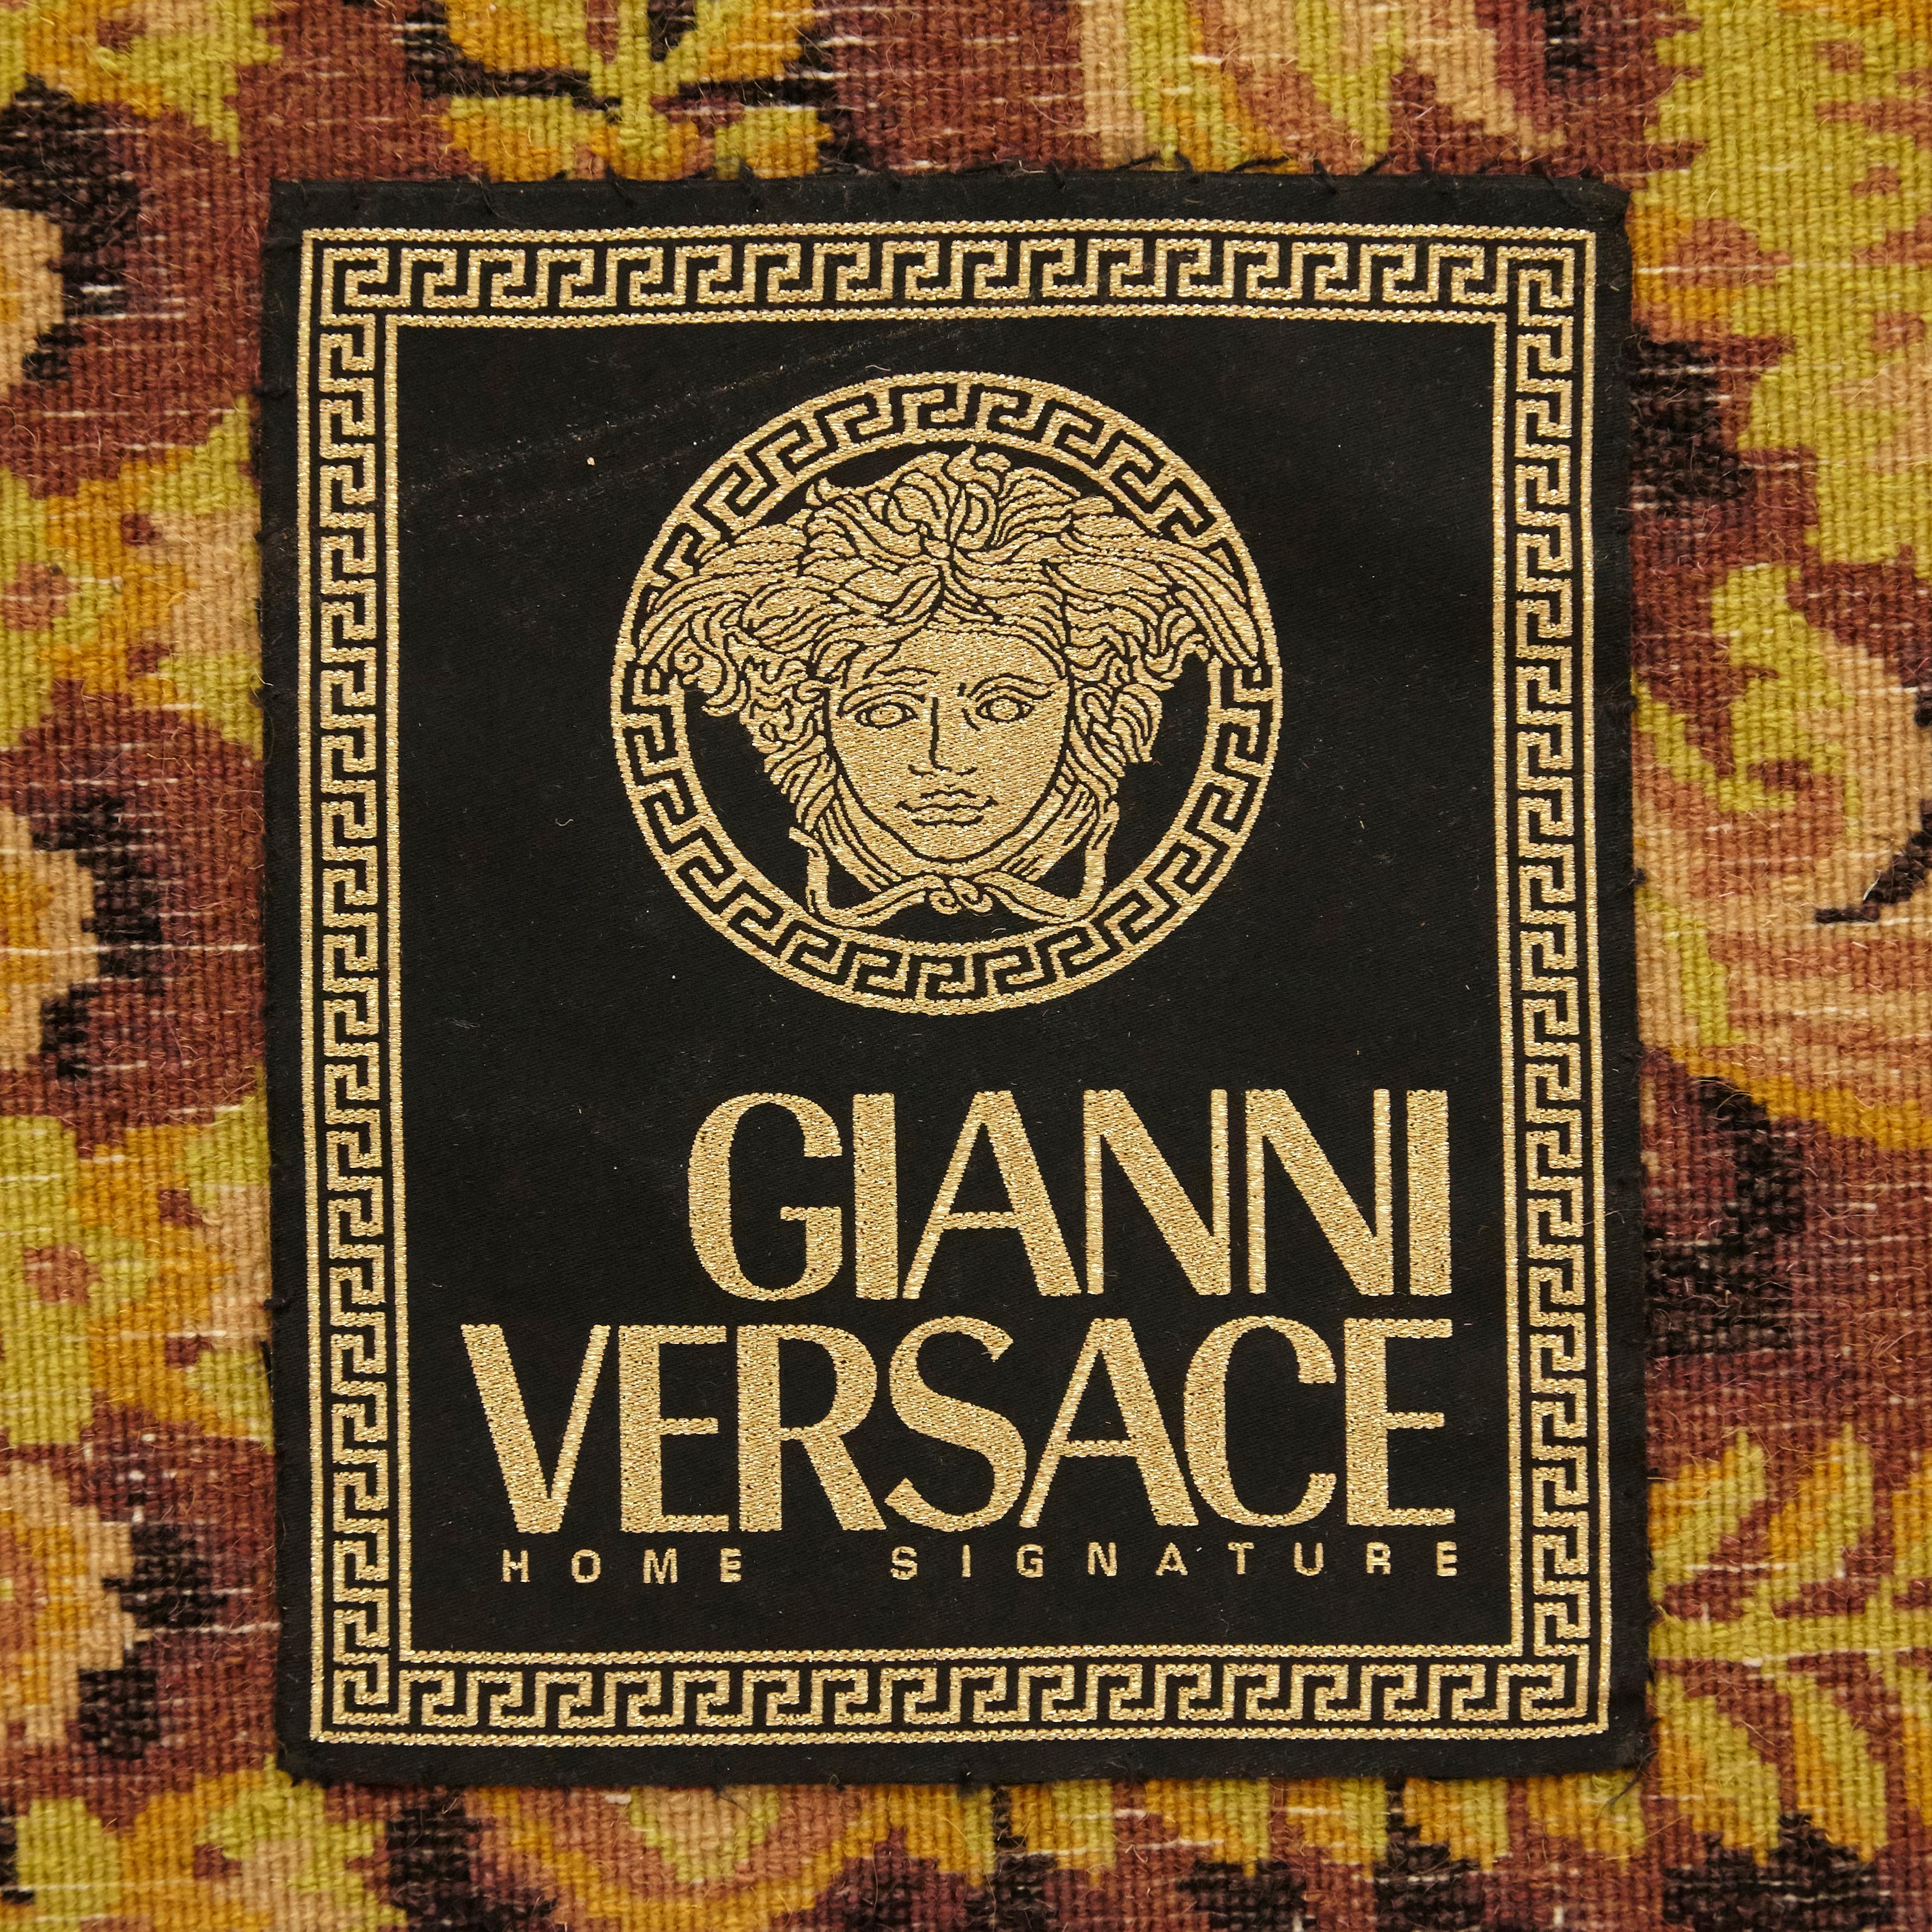 Chinese Gianni Versace Collection Rug Wild Barocco, Gold Leopard Animal Print, 1980